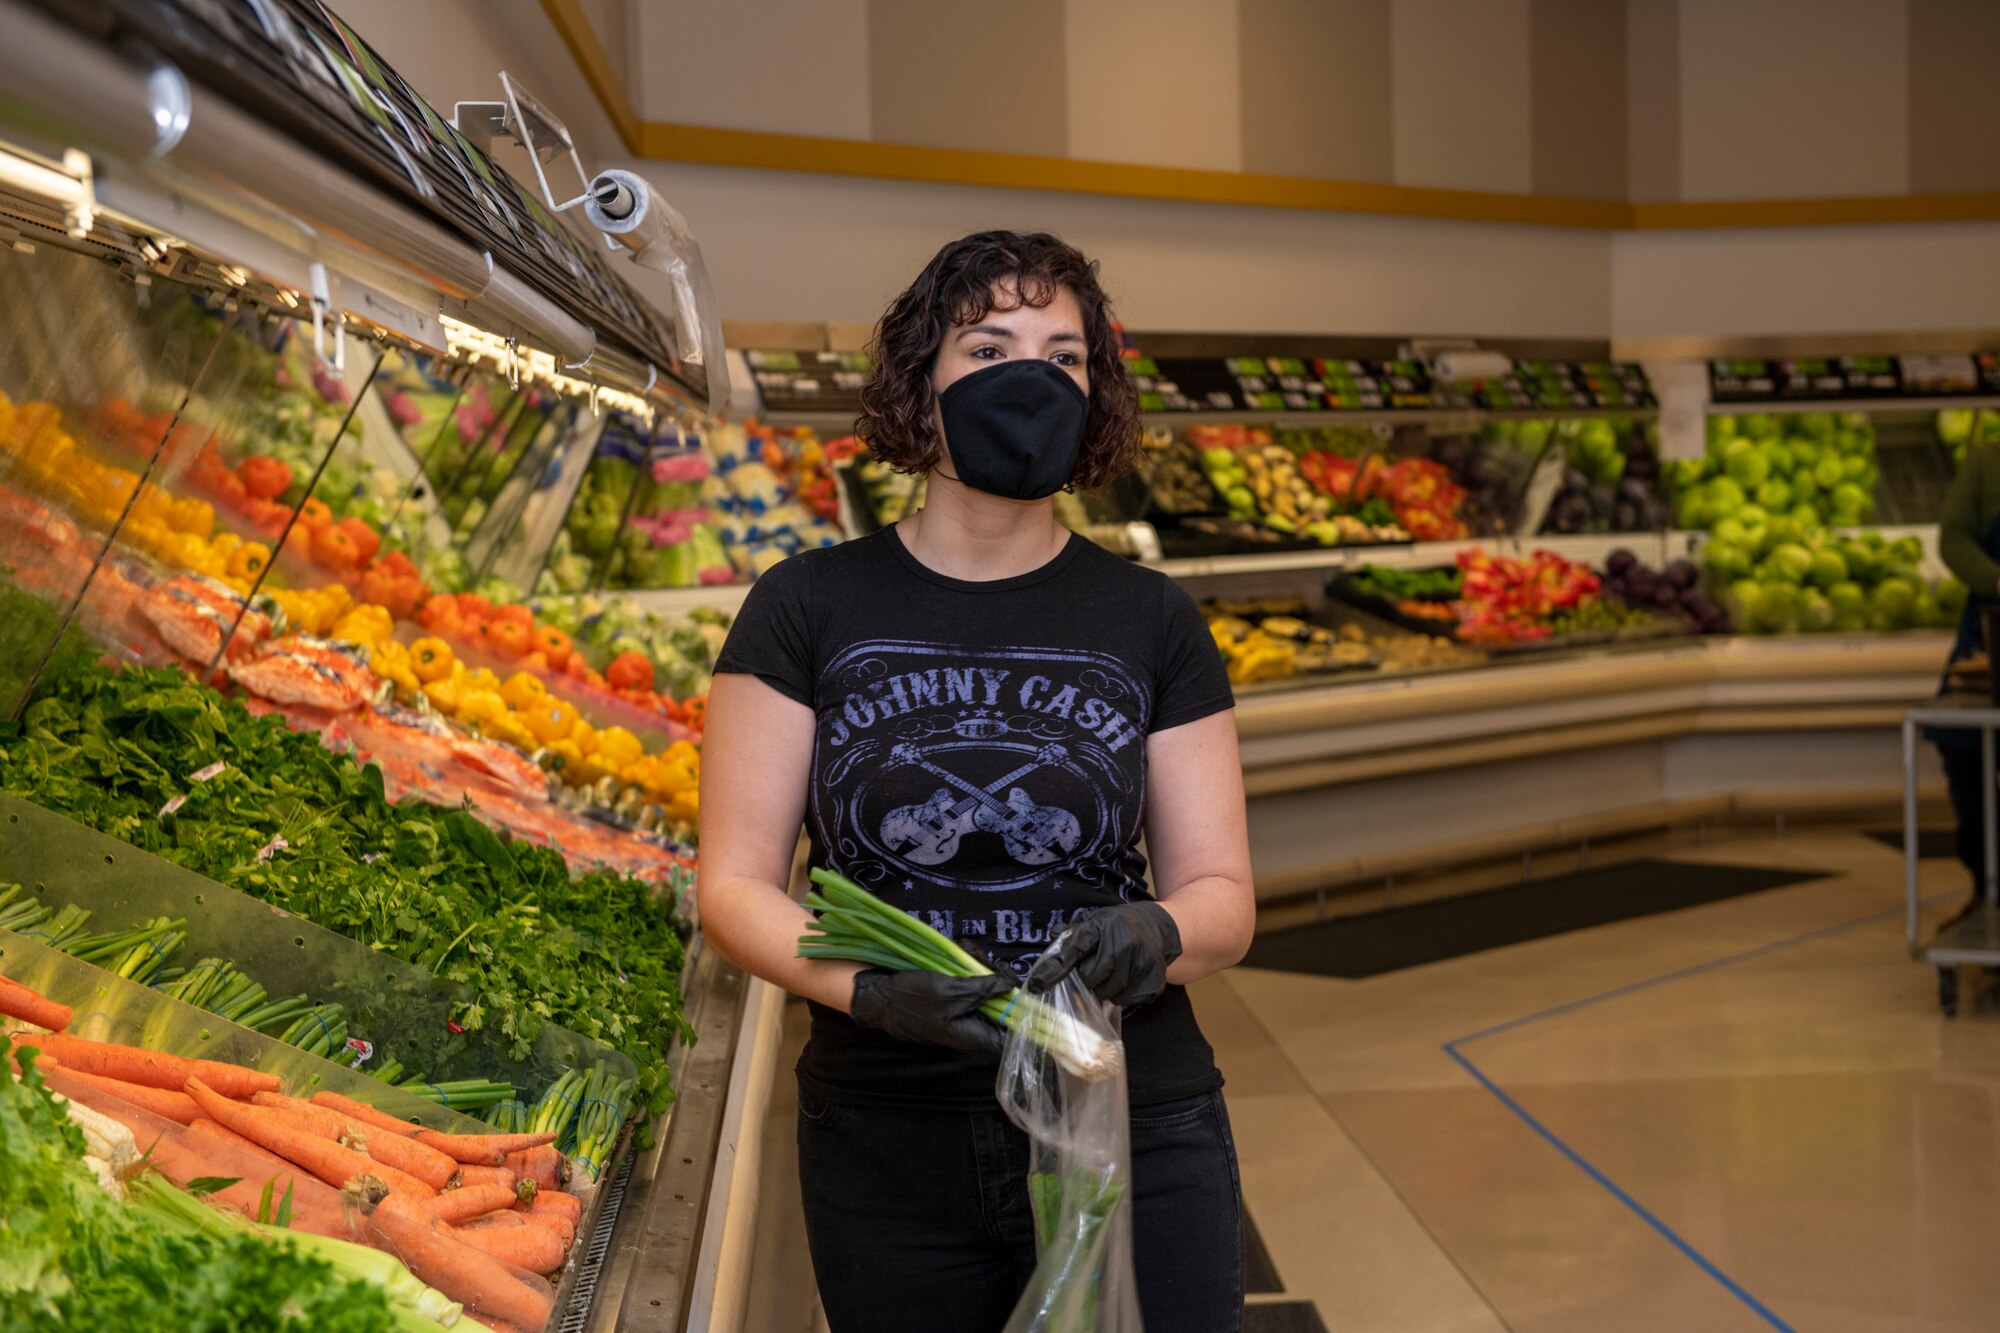 U.S. Air Force Senior Airman Nichole Krinberg, 60th Aerial Port Squadron air transportation journeyman, shops for vegetables April 16, 2020, inside the commissary at Travis Air Force Base, California. Since the coronavirus pandemic, some food and household goods such as toilet paper and paper towels have become increasingly scarce. (U.S. Air Force photo by Tech. Sgt. James Hodgman)